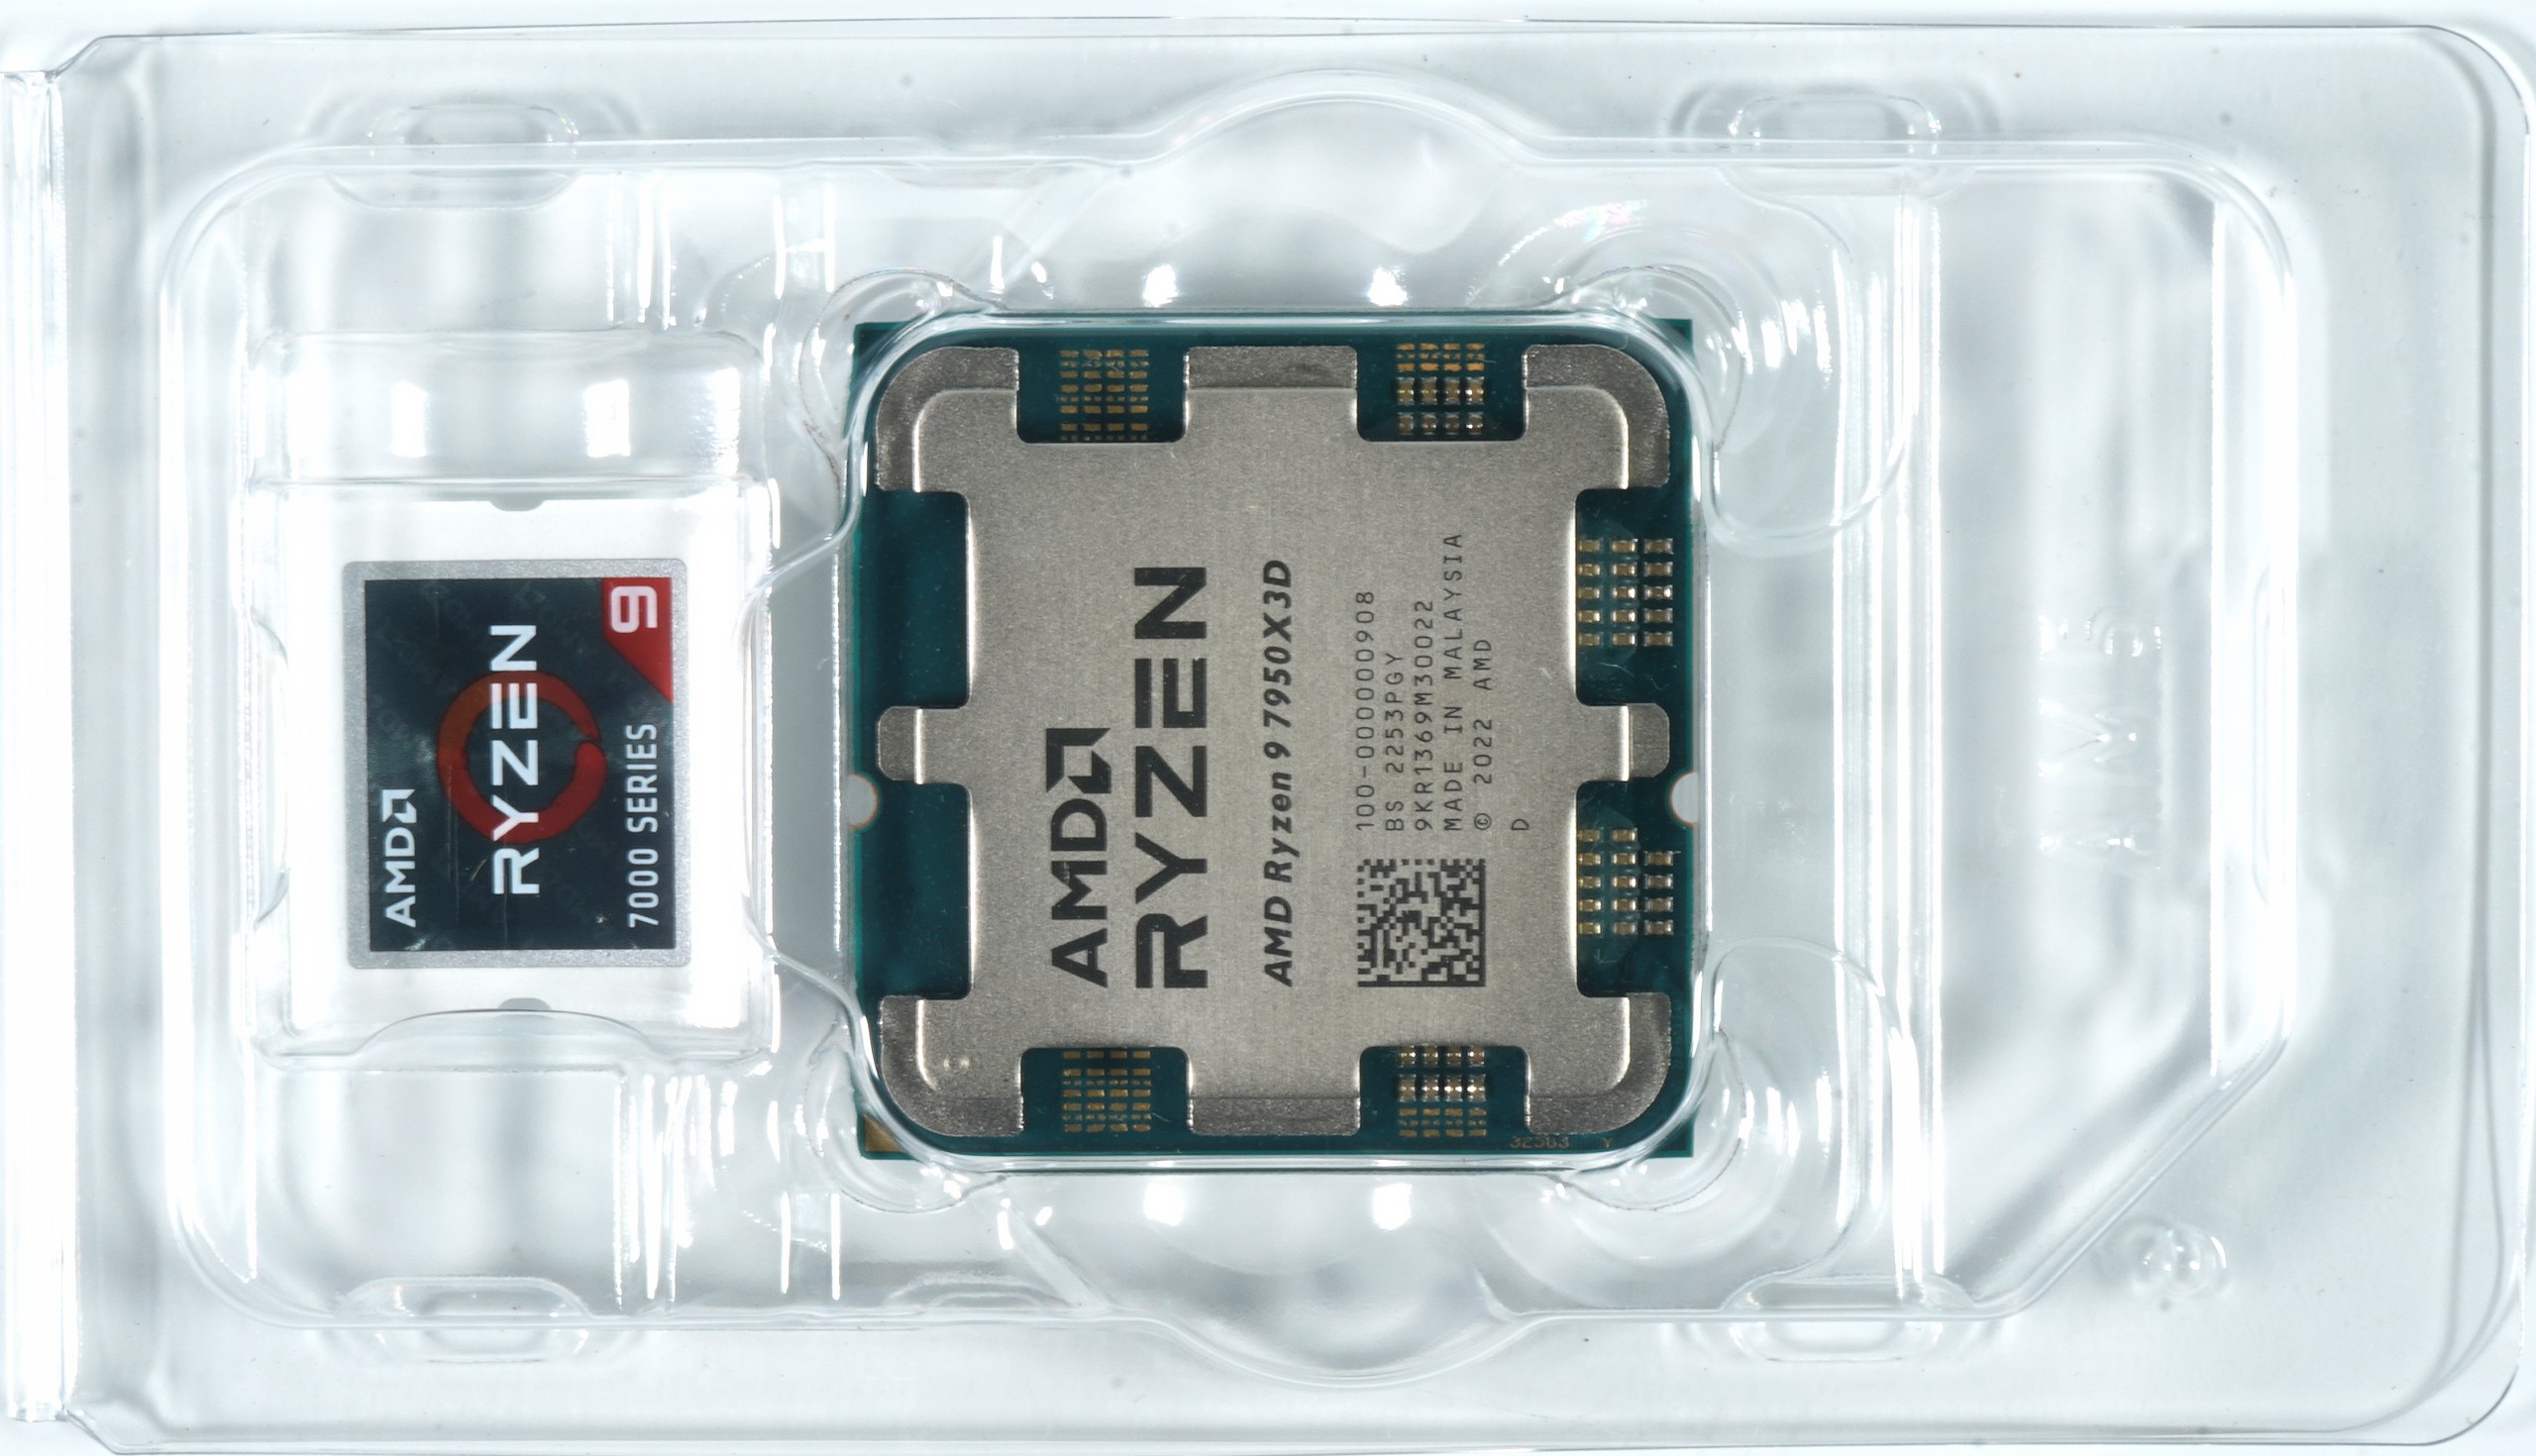 AMD Ryzen 9 7950X3D CPU Review: Performance, Thermals & Power Analysis -  Page 3 of 13 - Hardware Busters